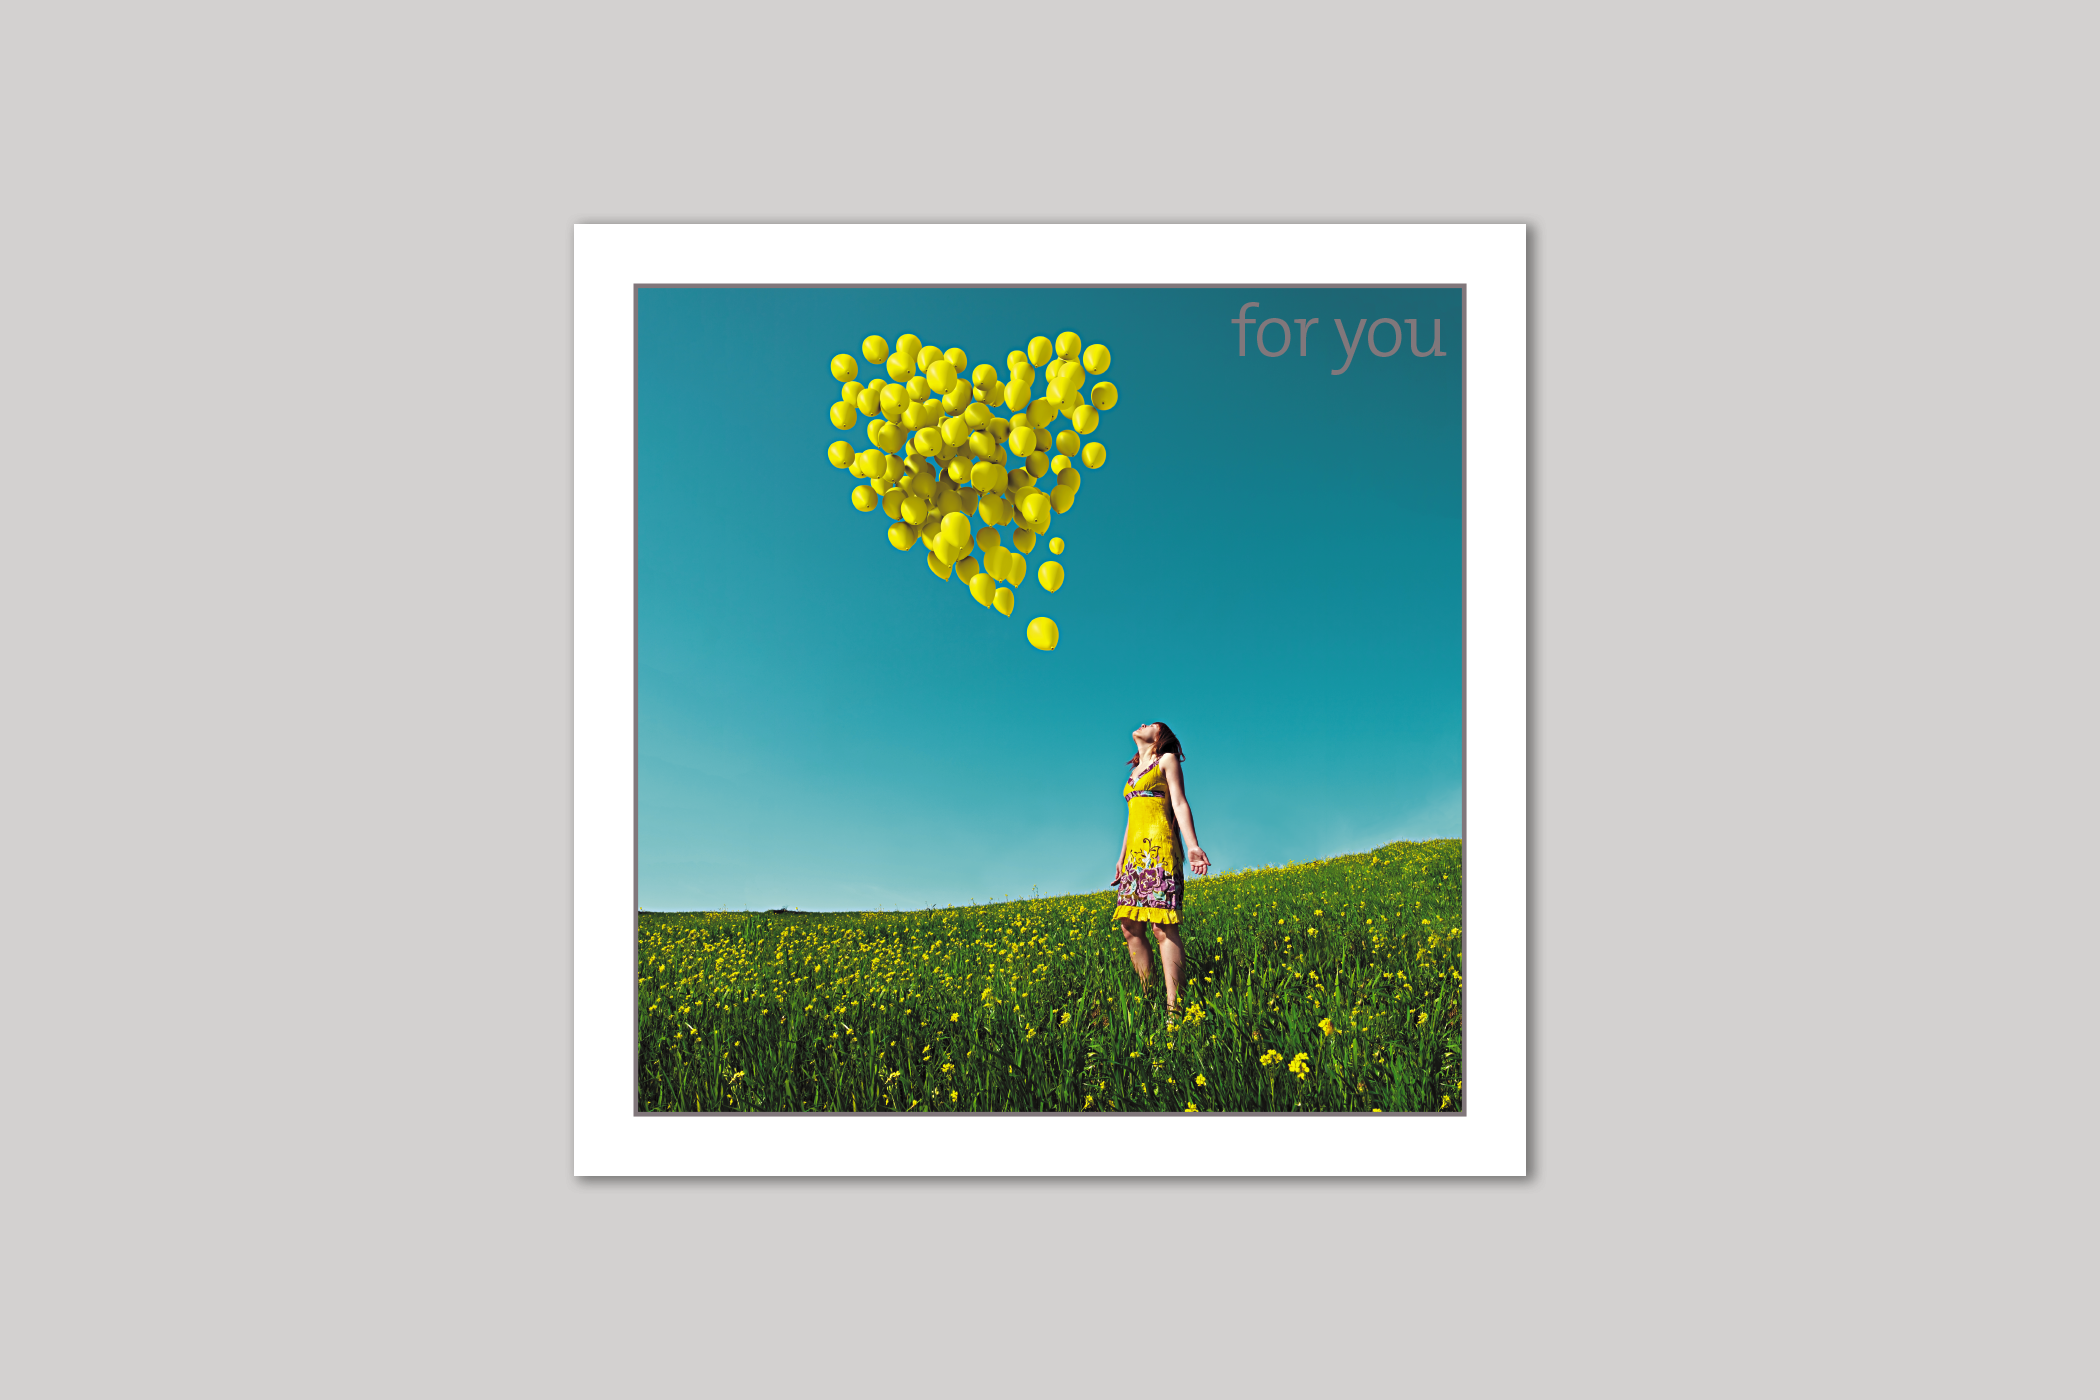 Blissful Balloons from Exposure Silver Edition range of greeting cards by Icon.